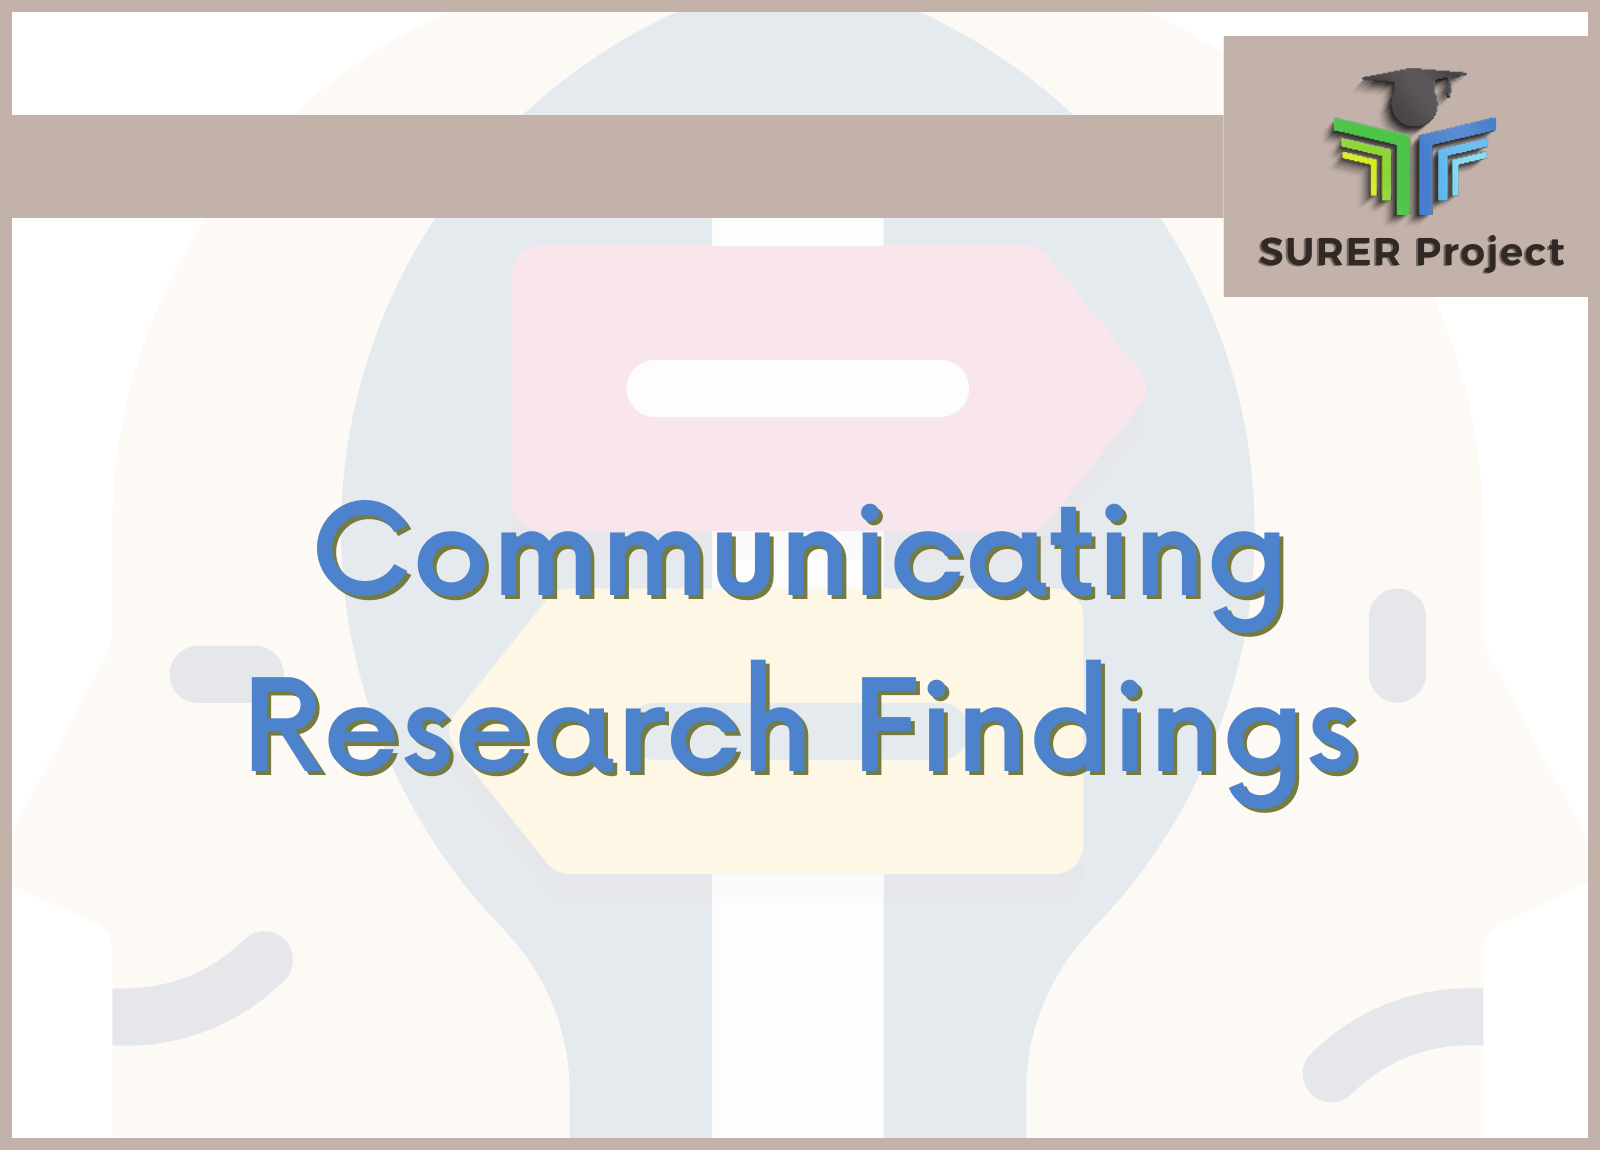 research findings communicating